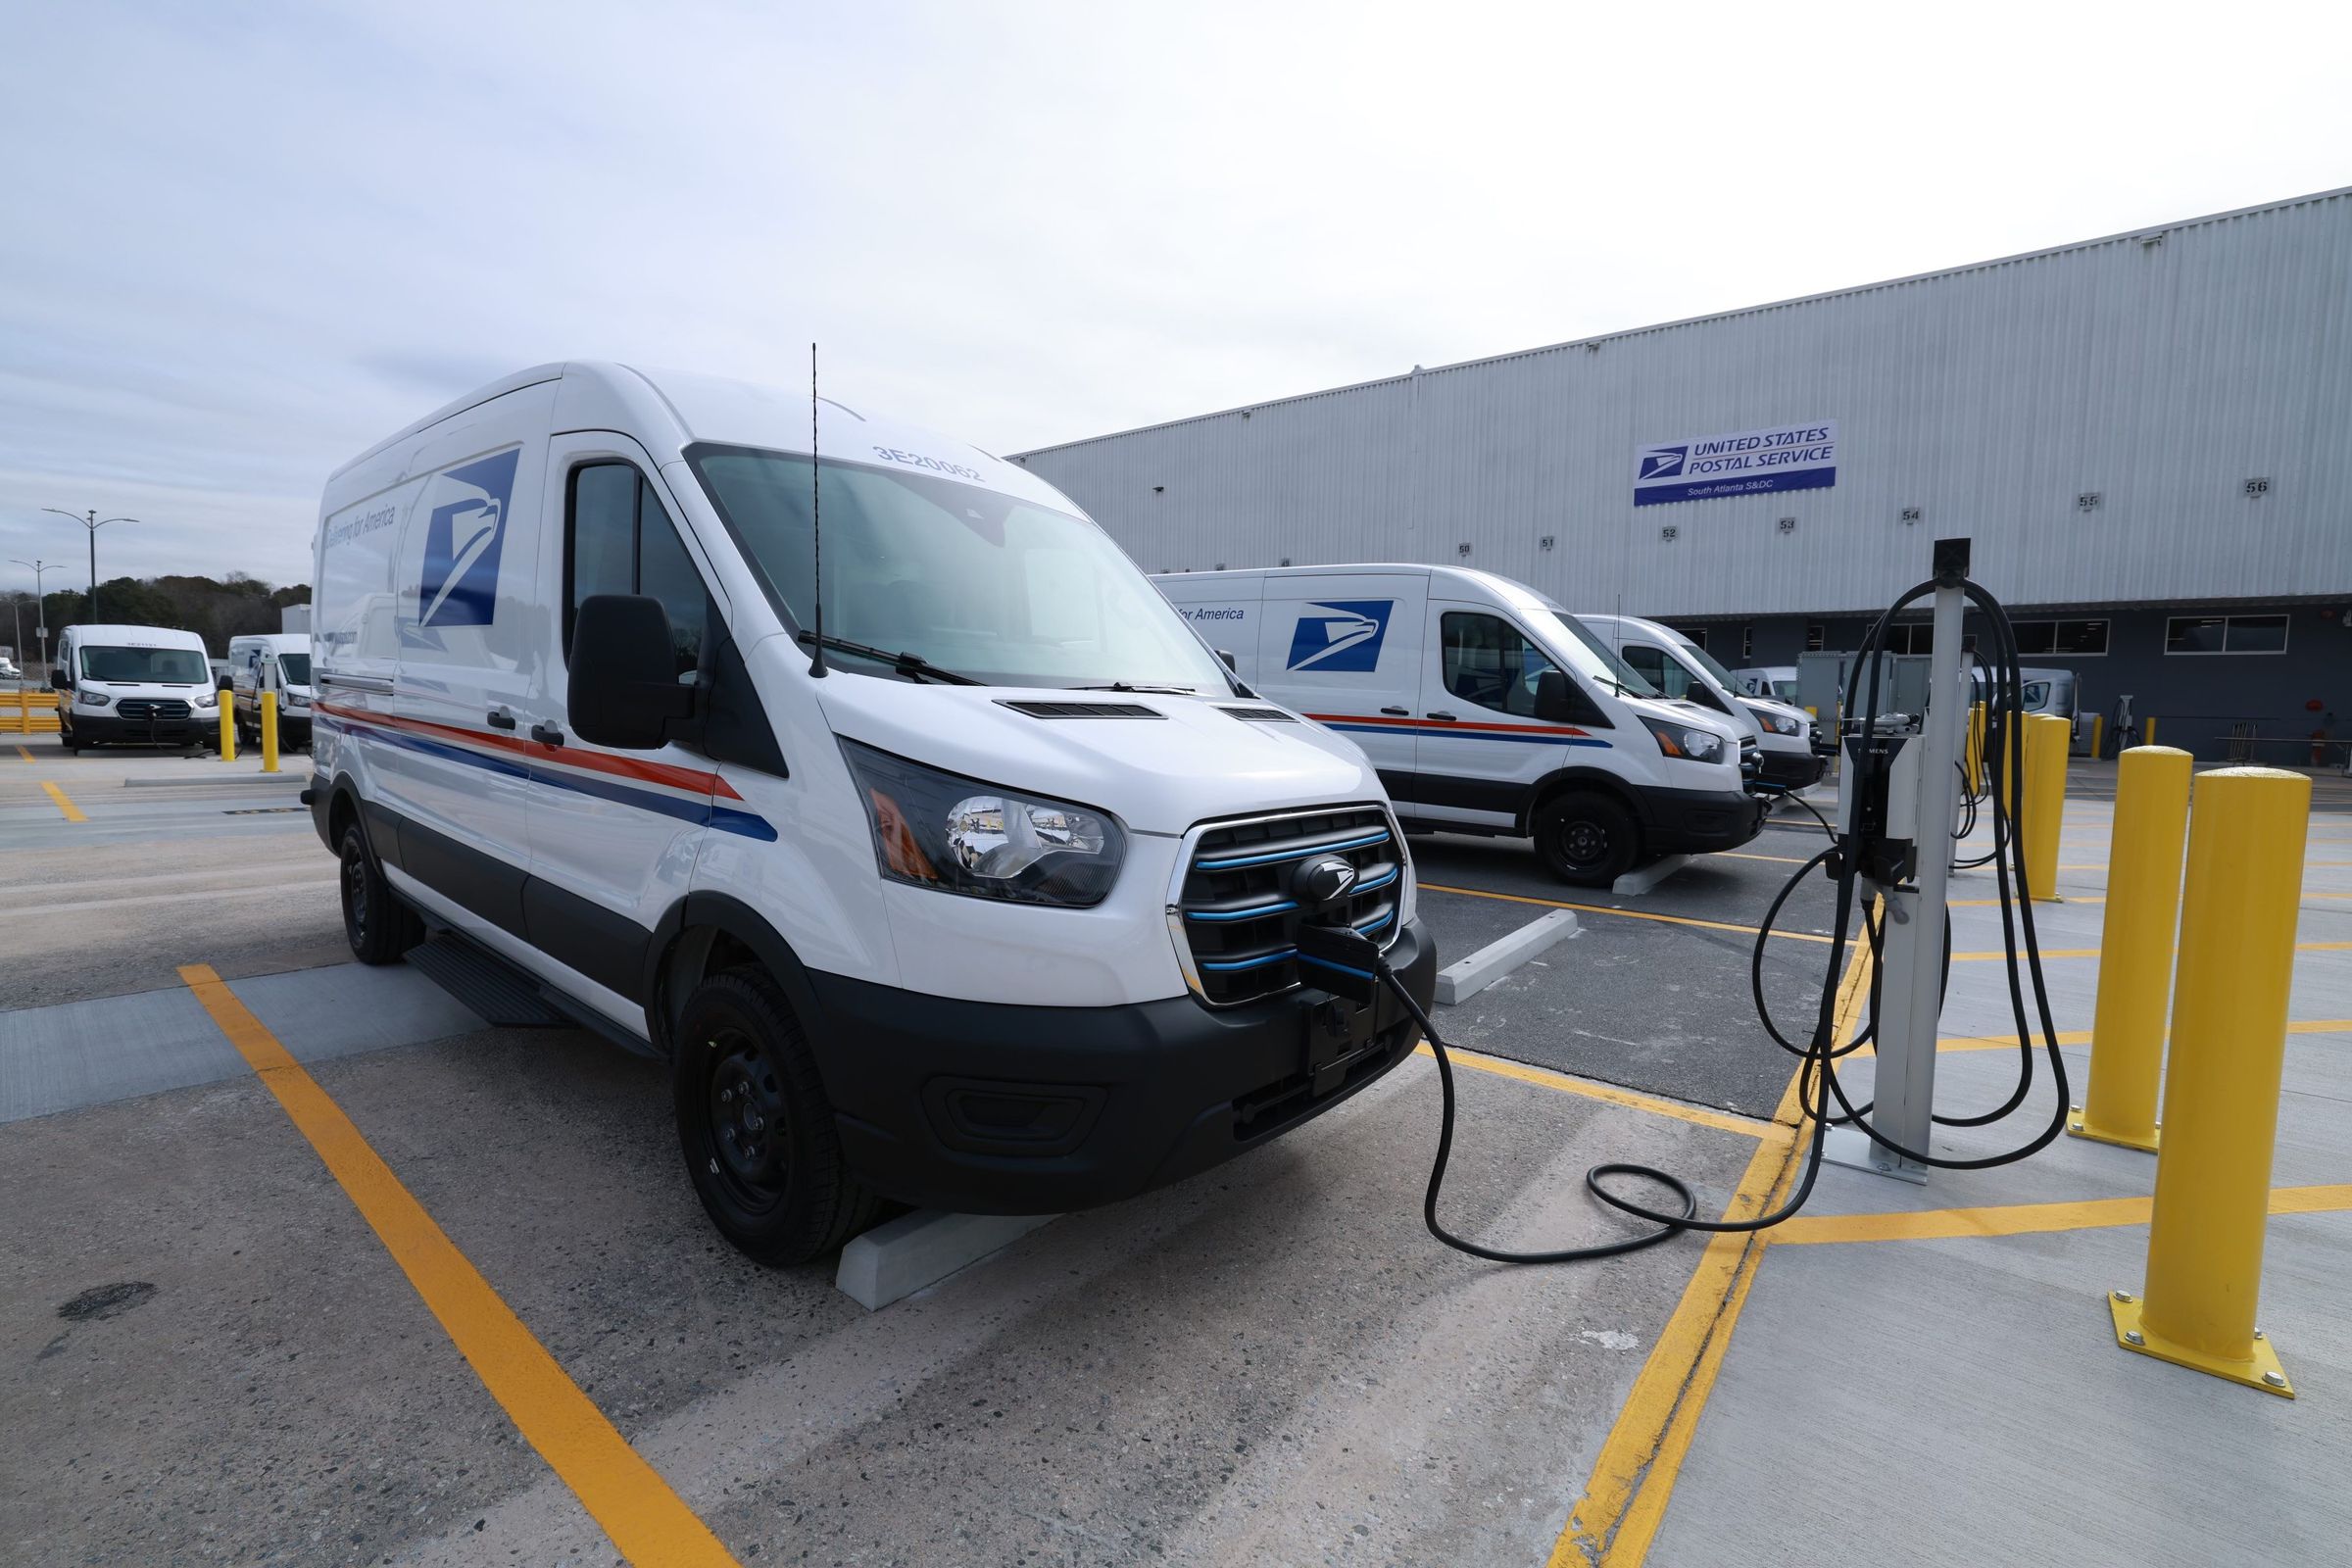 An electric delivery truck is plugged into a charging station in a parking lot.